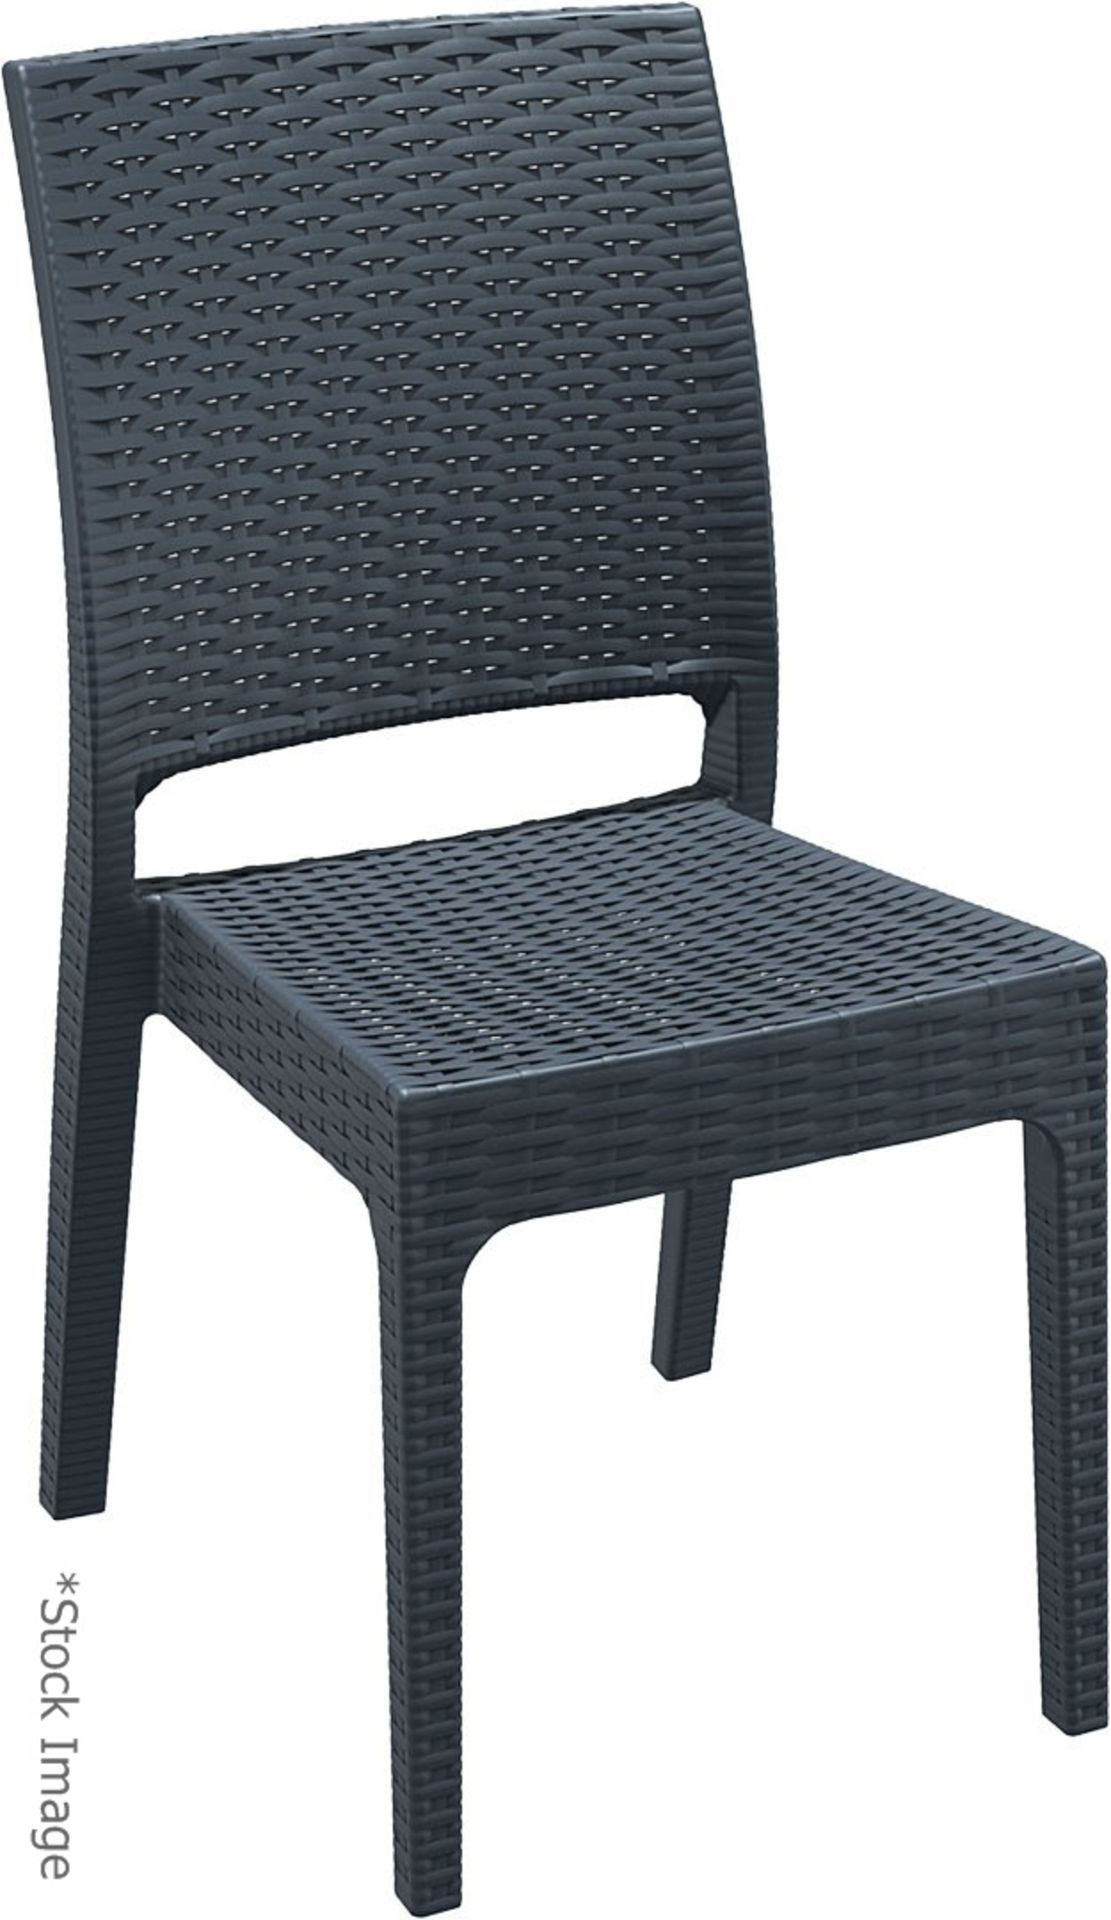 4 x SIESTA EXCLUSIVE 'Florida' Commercial Stackable Rattan-style Chairs In Dark Grey - RRP £320.00 - Image 13 of 13